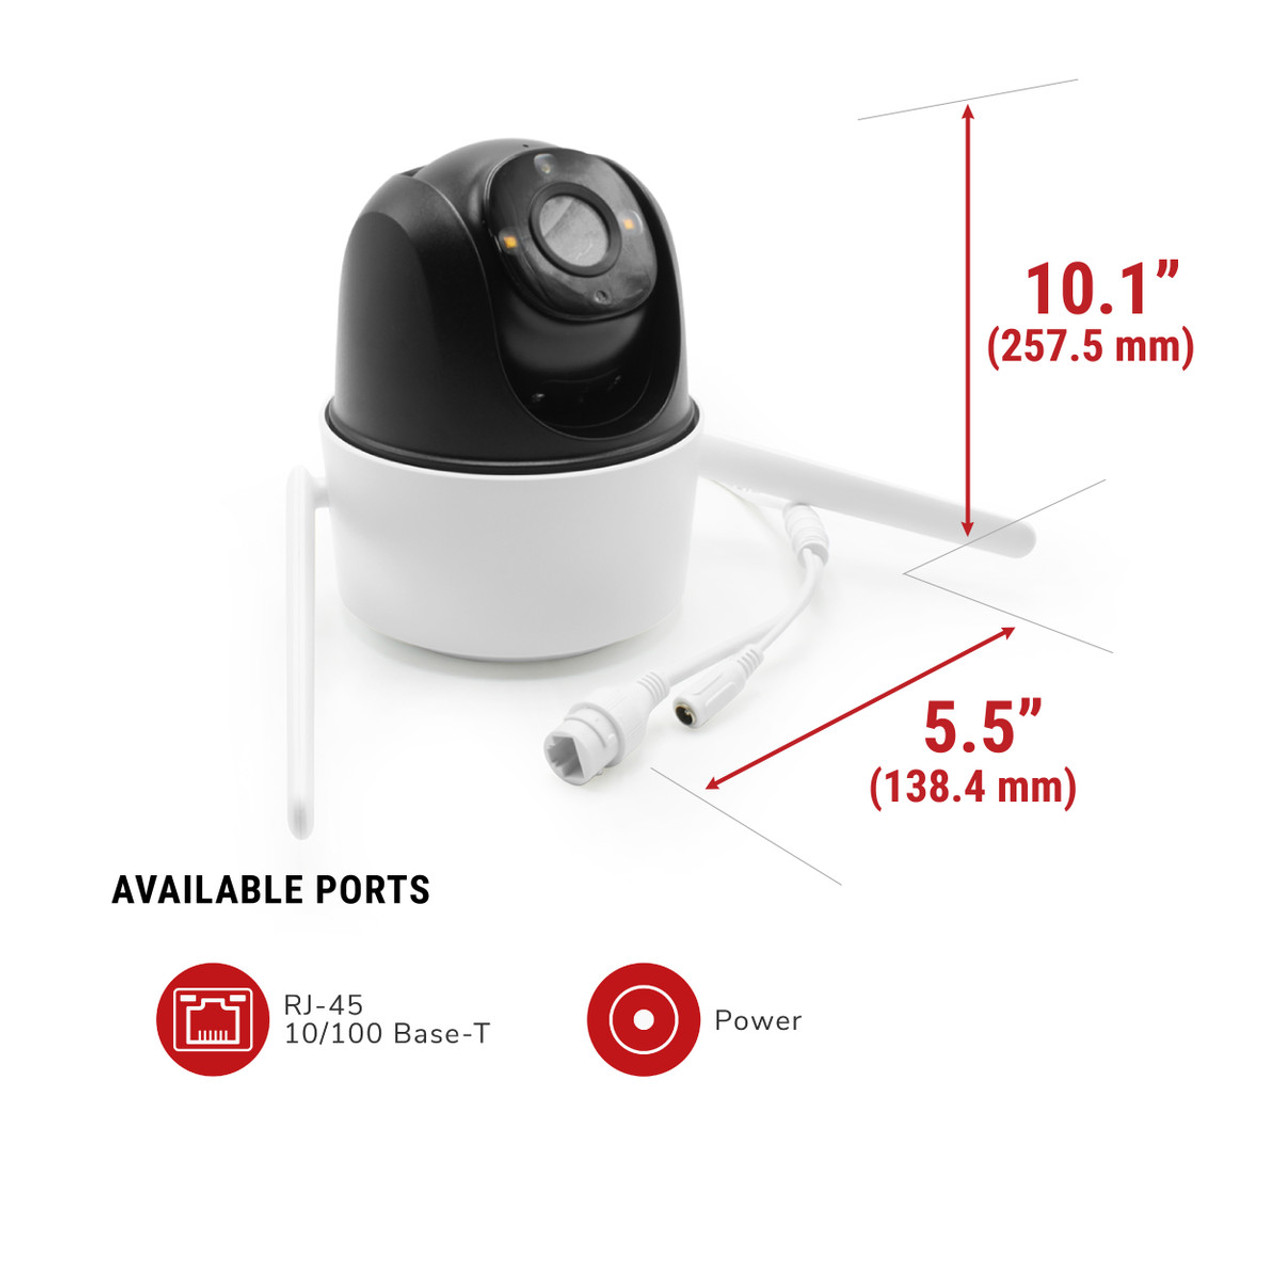 IC Realtime Orb-Outdoor 4MP QHD 360-Degree Outdoor WiFi Security Camera